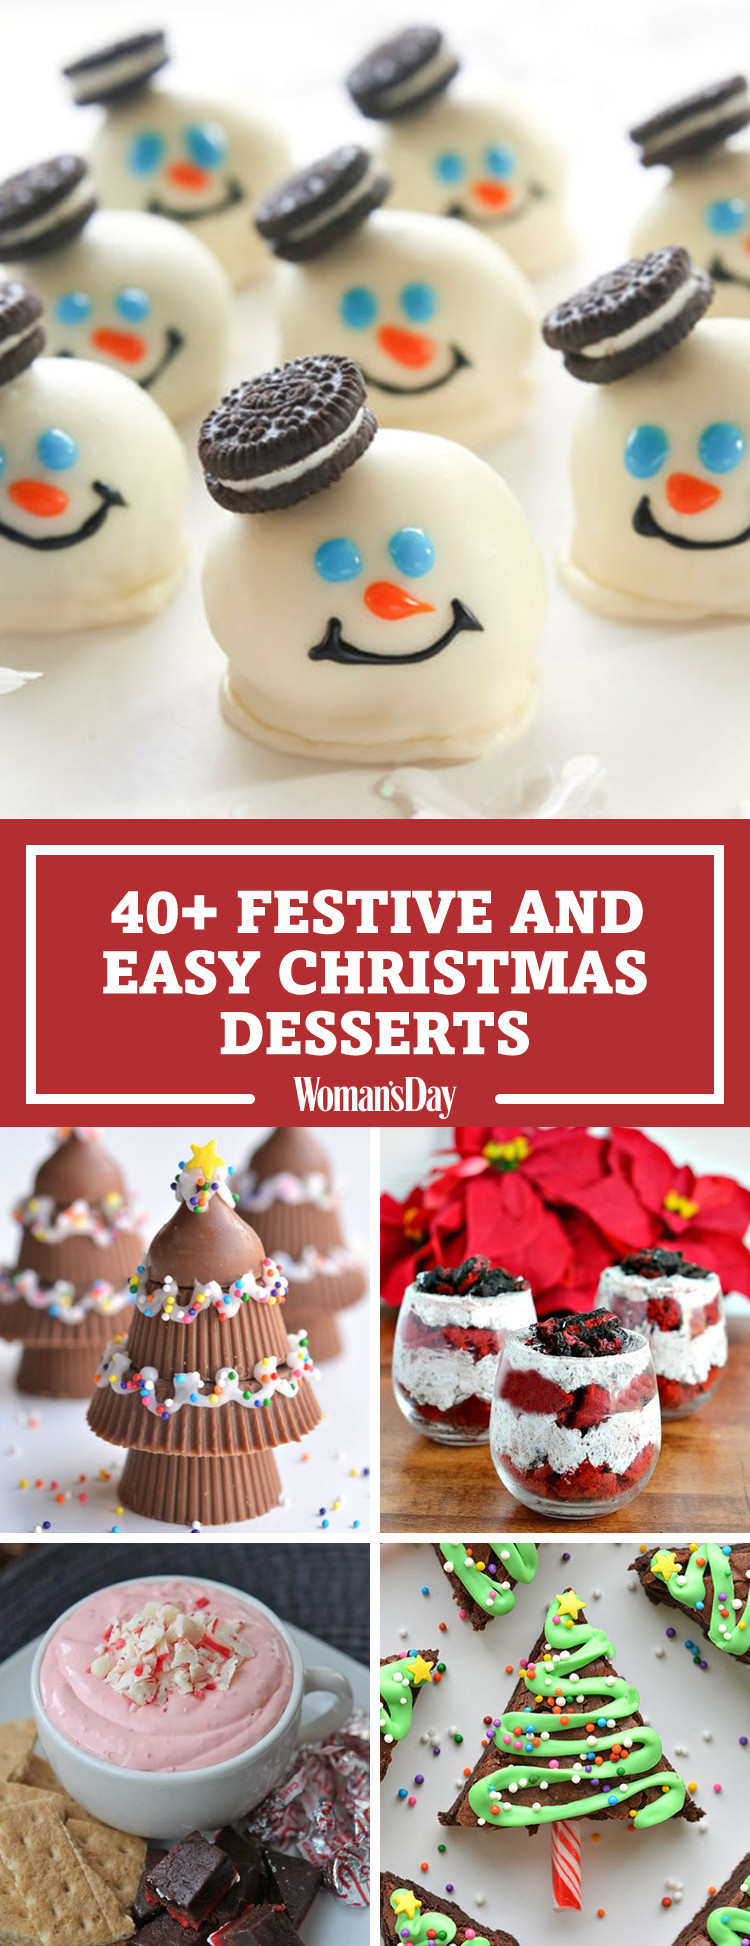 Quick Easy Christmas Desserts
 57 Easy Christmas Dessert Recipes Best Ideas for Fun